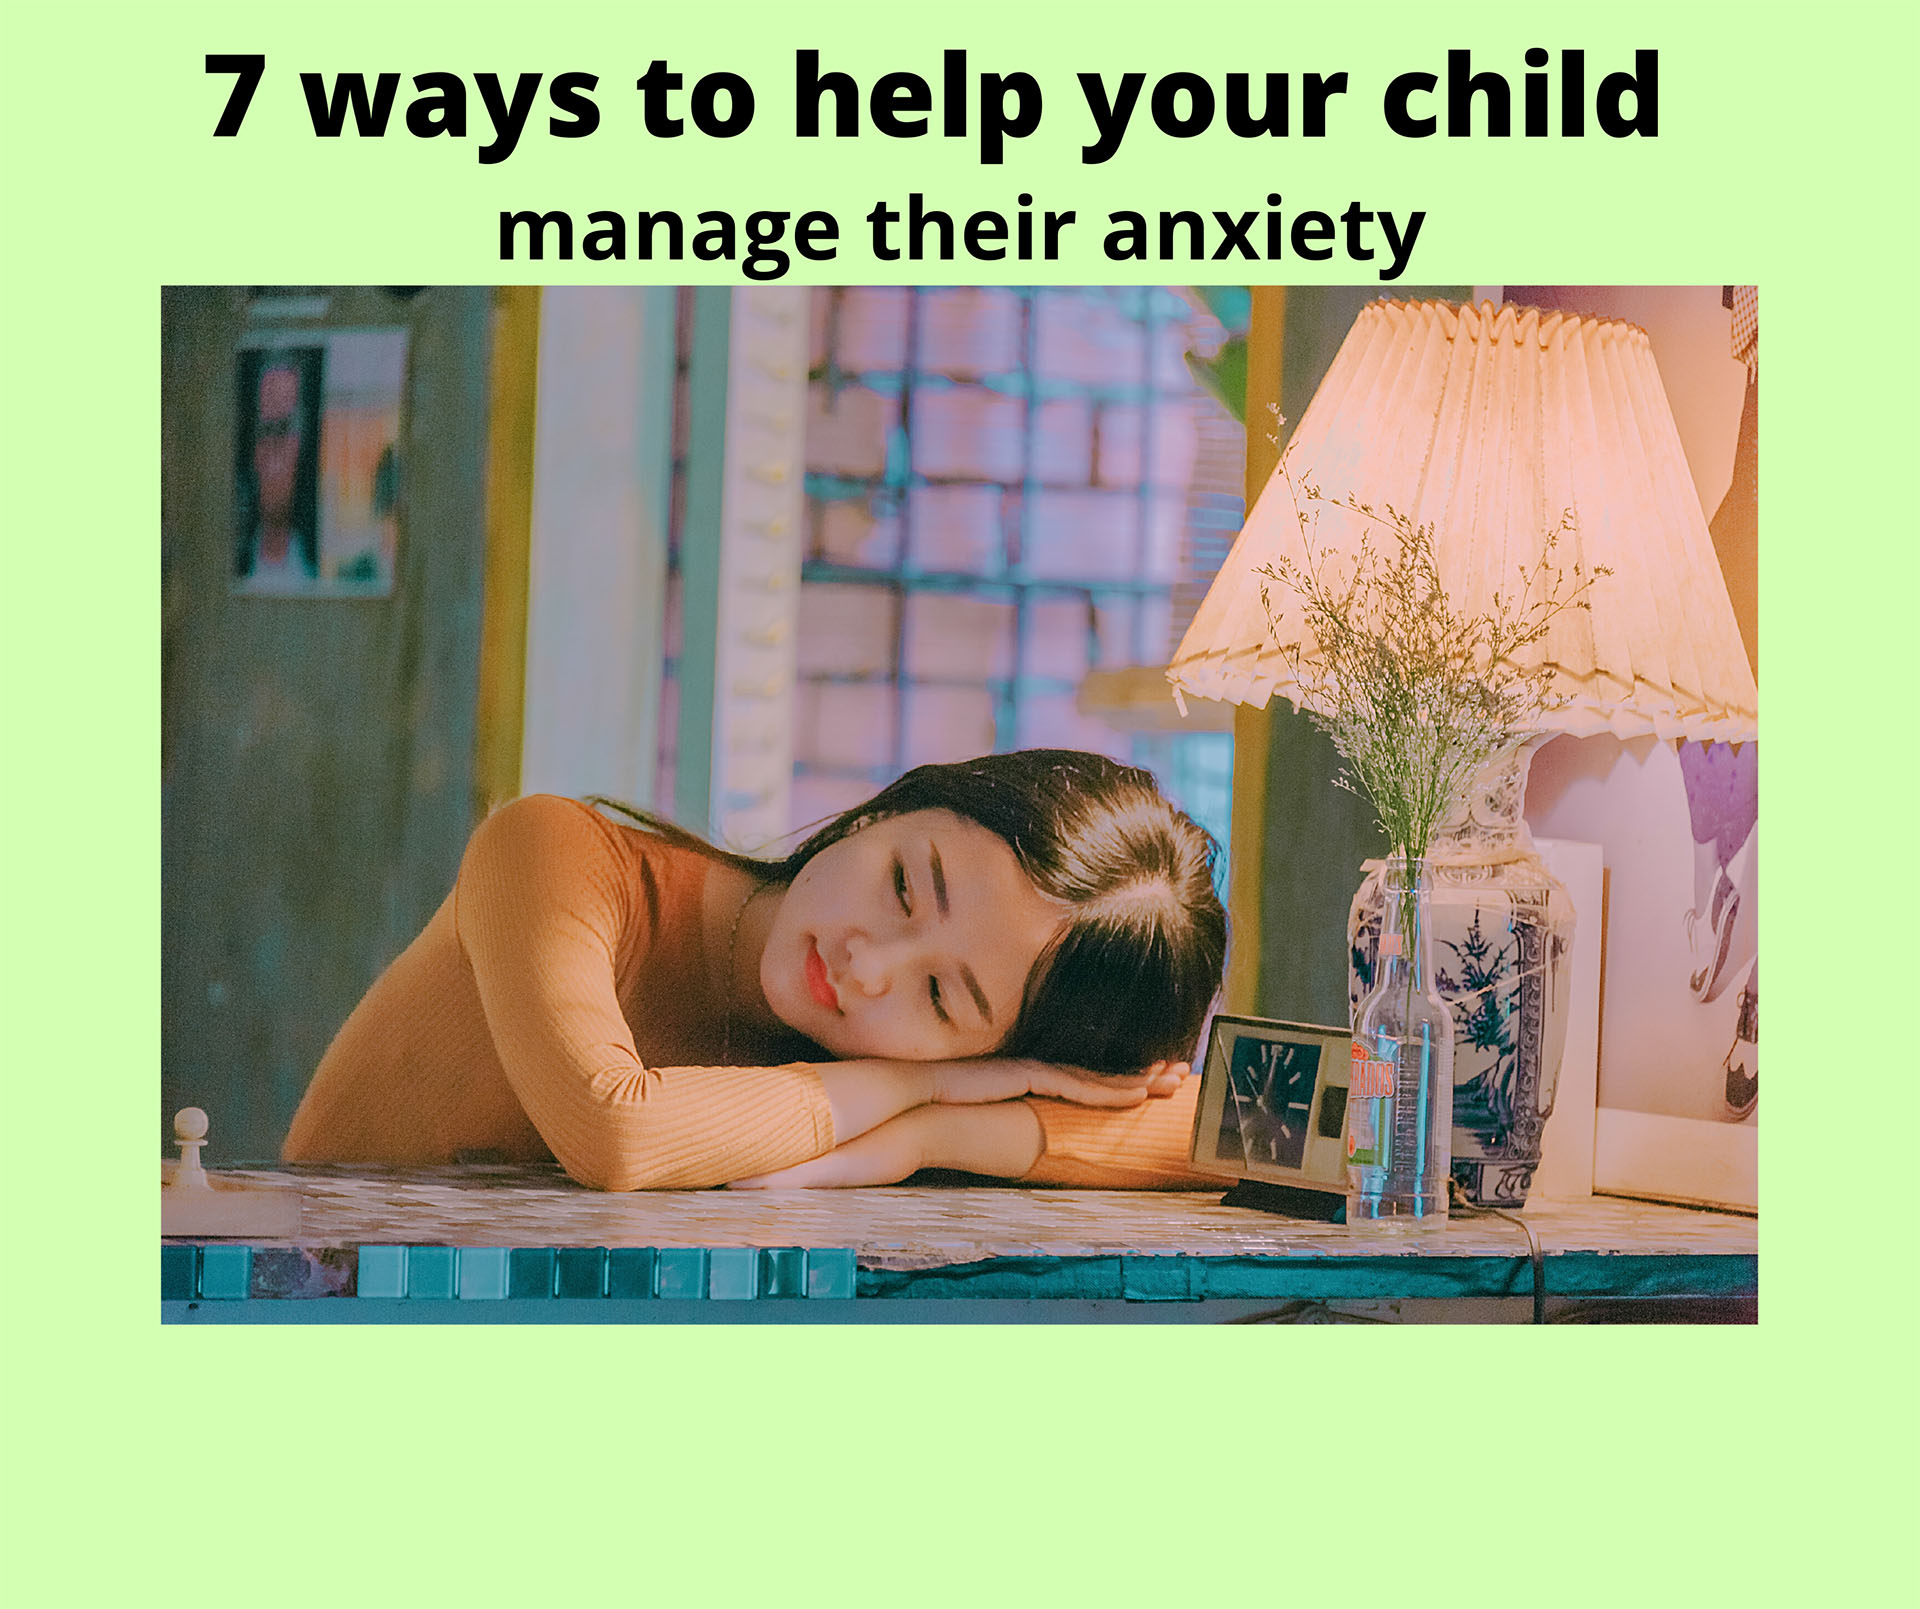 7 ways to help your child manage their anxiety